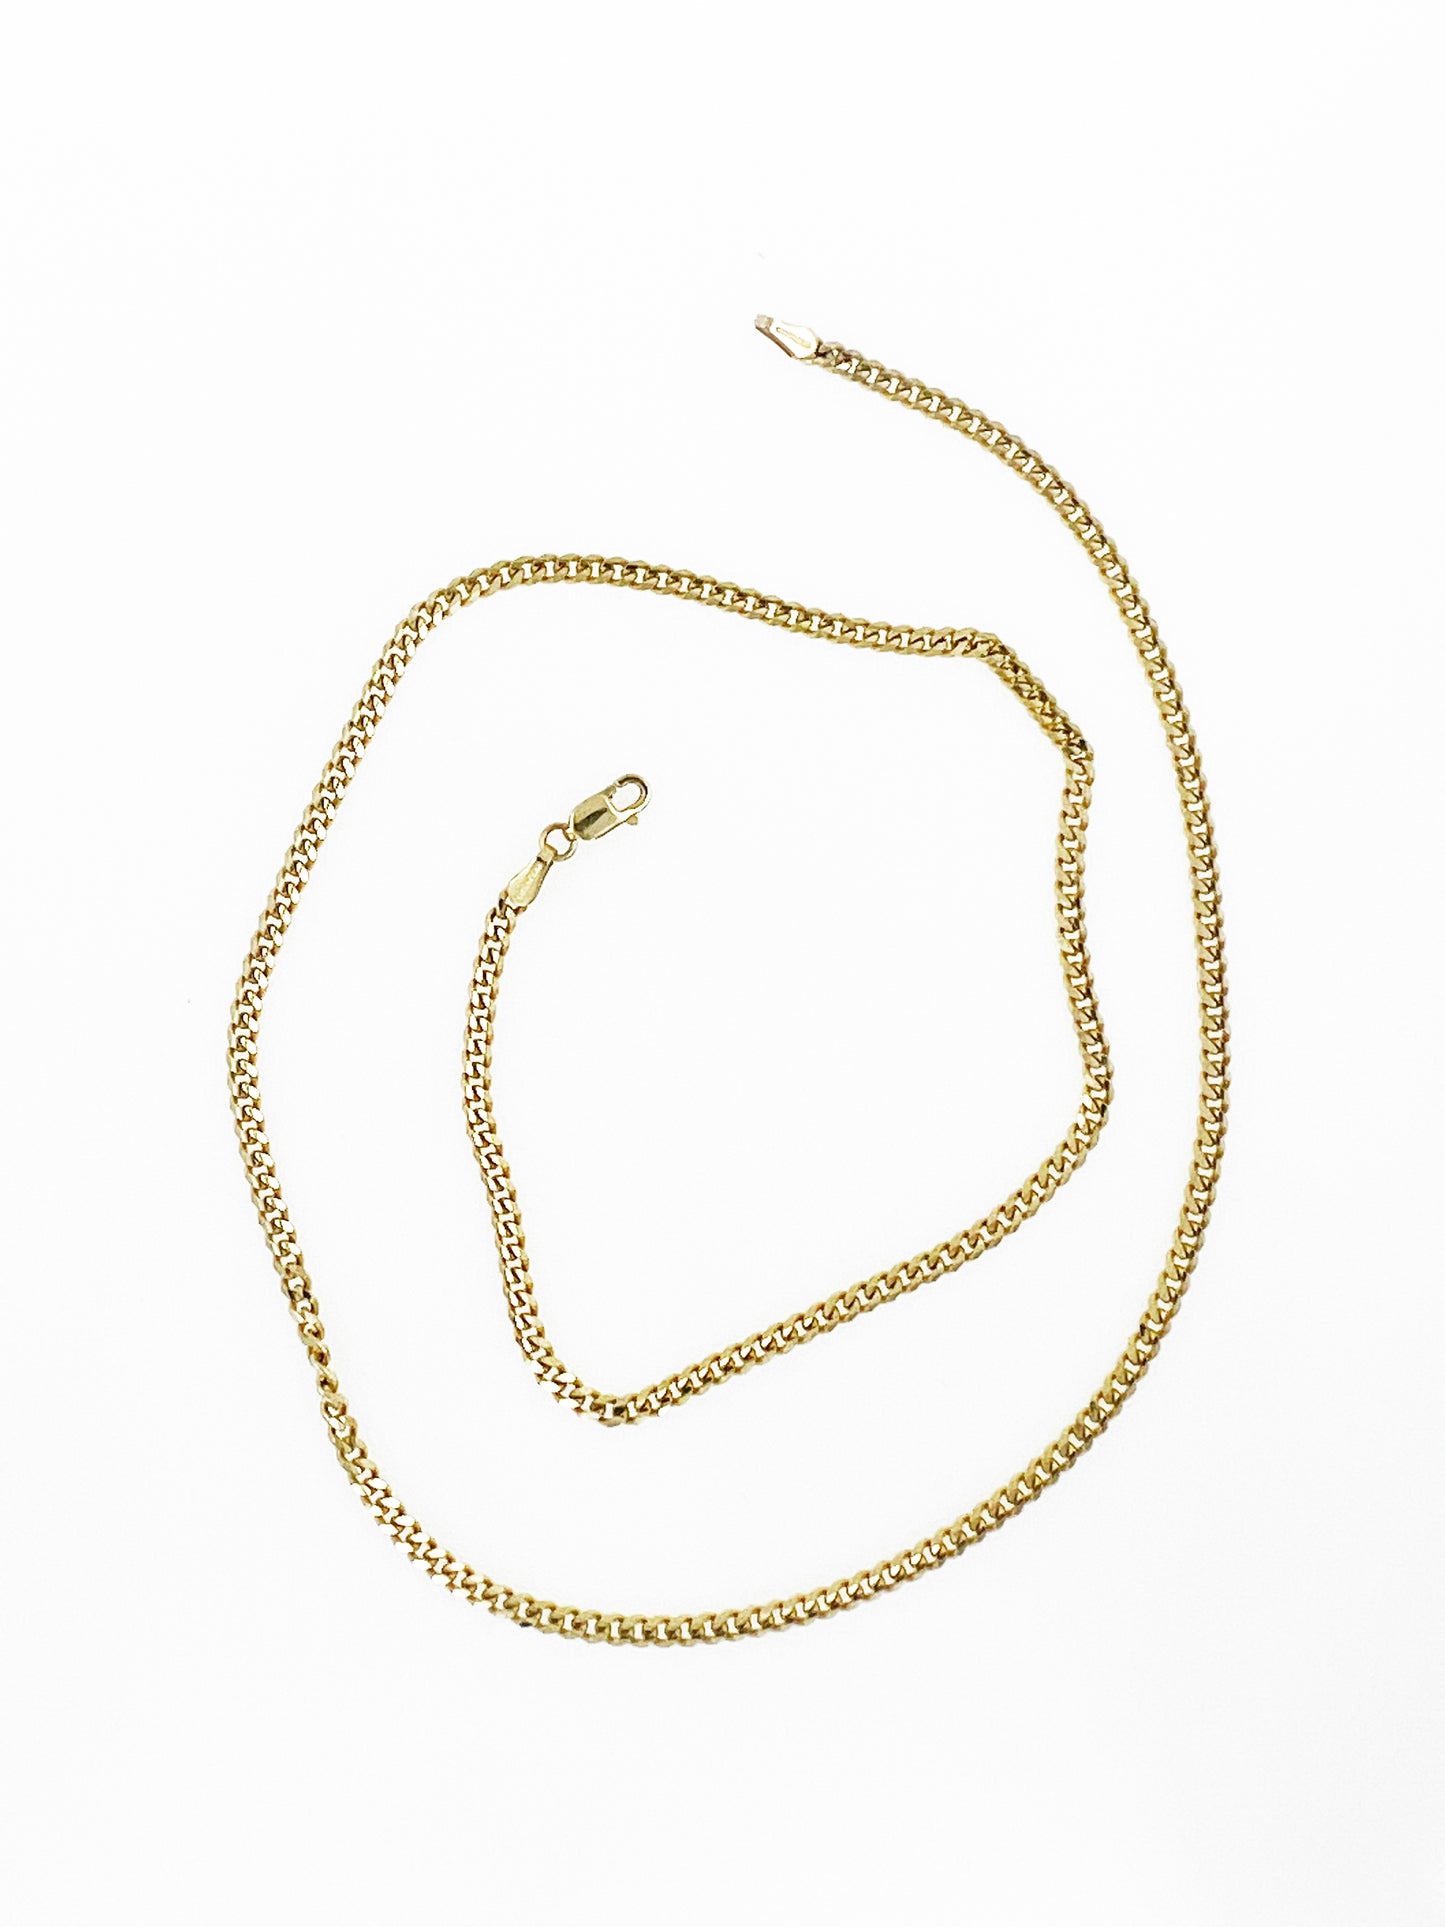 3mm Cuban Link Chain in 14k Yellow Gold (18")